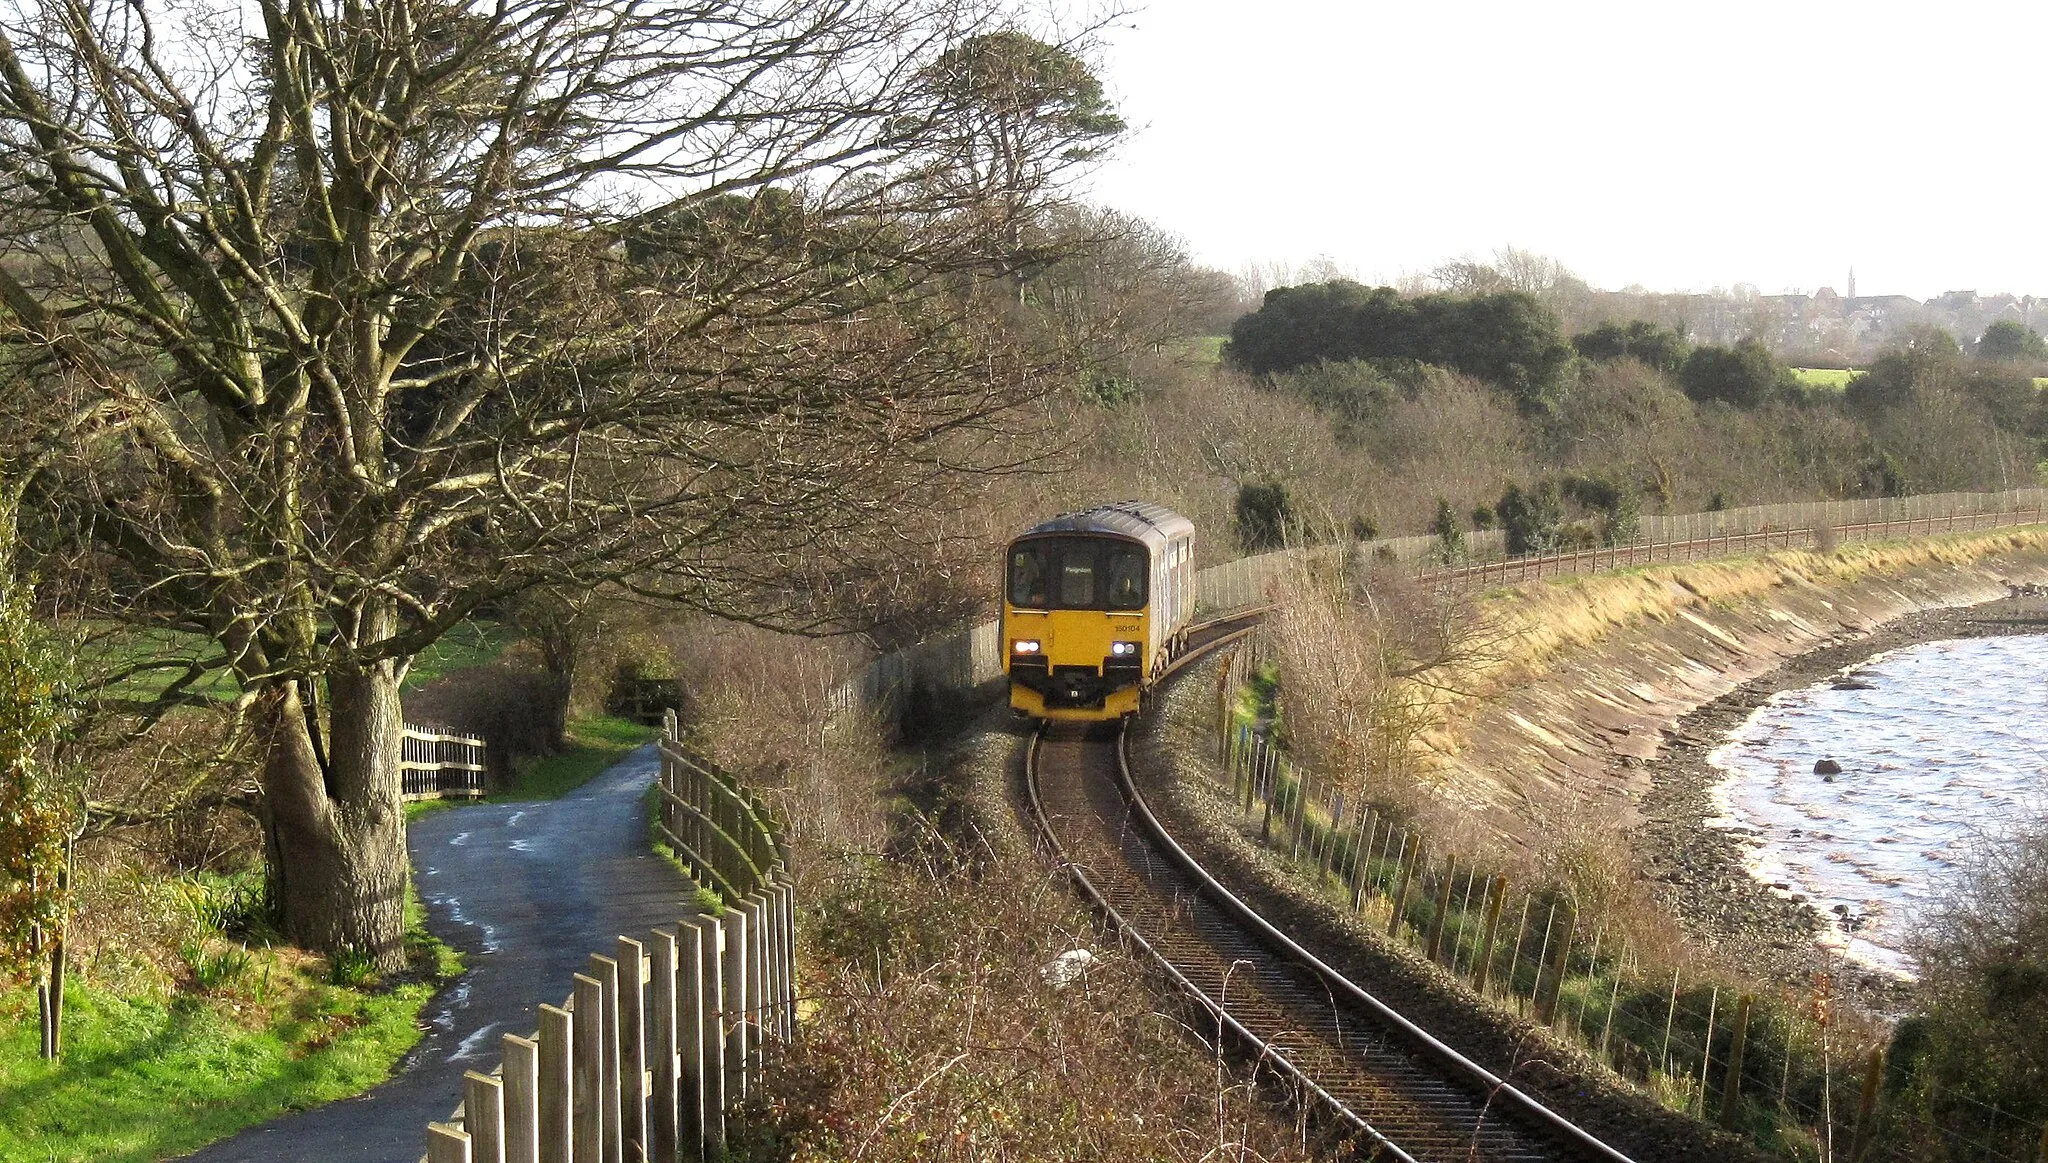 Photo showing: My last railway photographs for 2017 were taken from the excellent Exe Estuary Trail, which parallels the Exeter-Exmouth branch line. The trains are a mix of Class 150 and 143 units in a variety of liveries - nothing special, but likely to be replaced fairly soon. It's a delightful walk with spectacular views over the estuary and plenty of trains on both sides of the river to keep me amused!